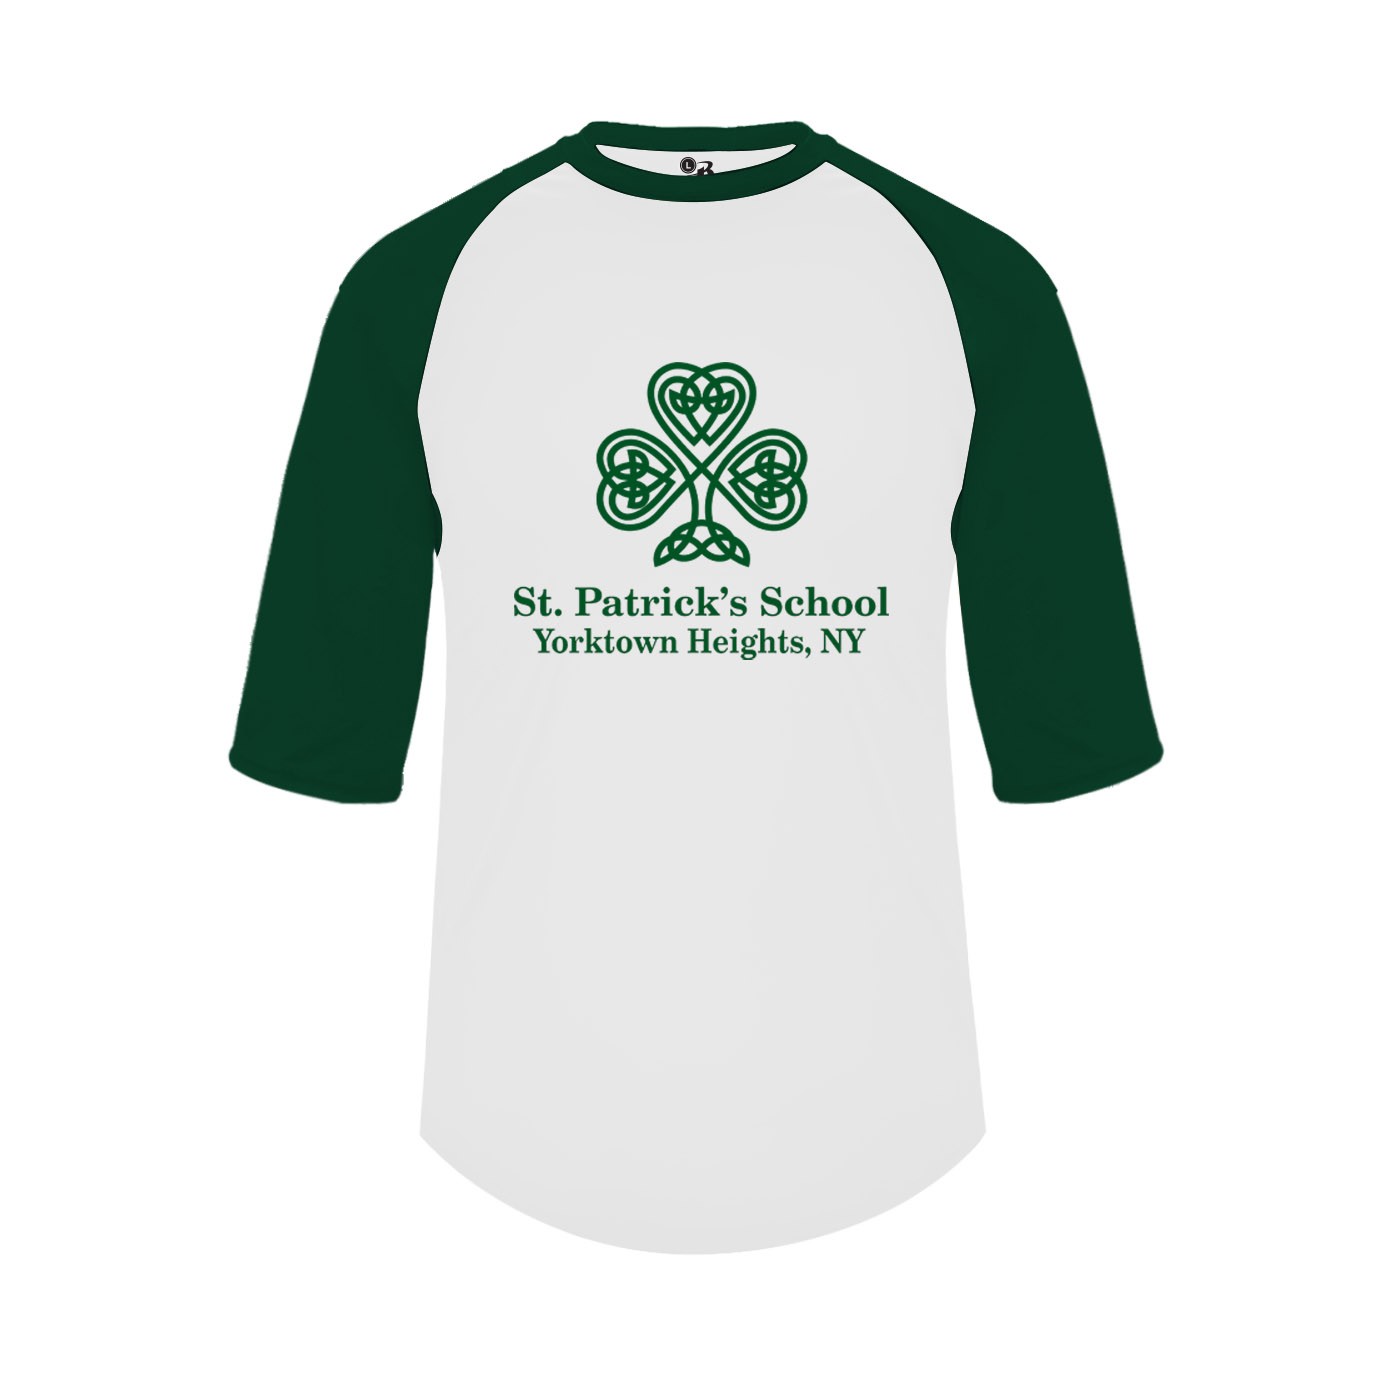 SPS S/S Three Quarter Sleeve Spirit T-Shirt w/ Green Logo - Please Allow 2-3 Weeks for Delivery